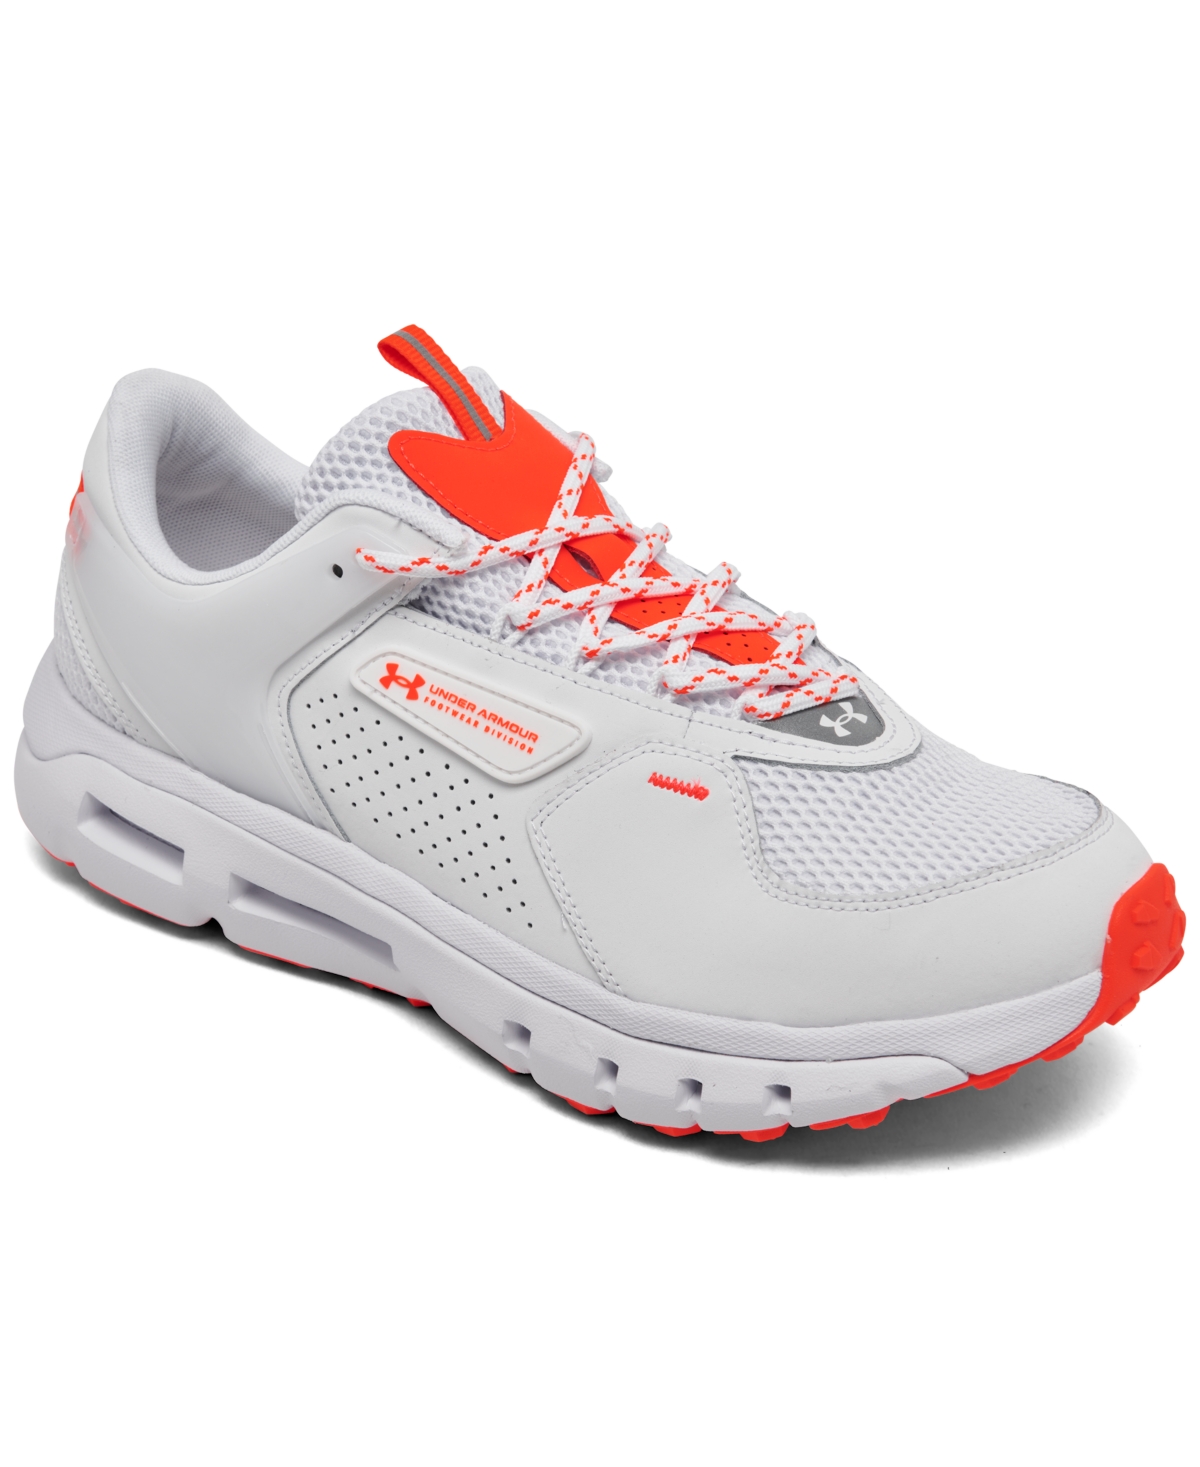 Men's Summit Trek Casual Trail Running Sneakers from Finish Line - WHITE/BOLT RED